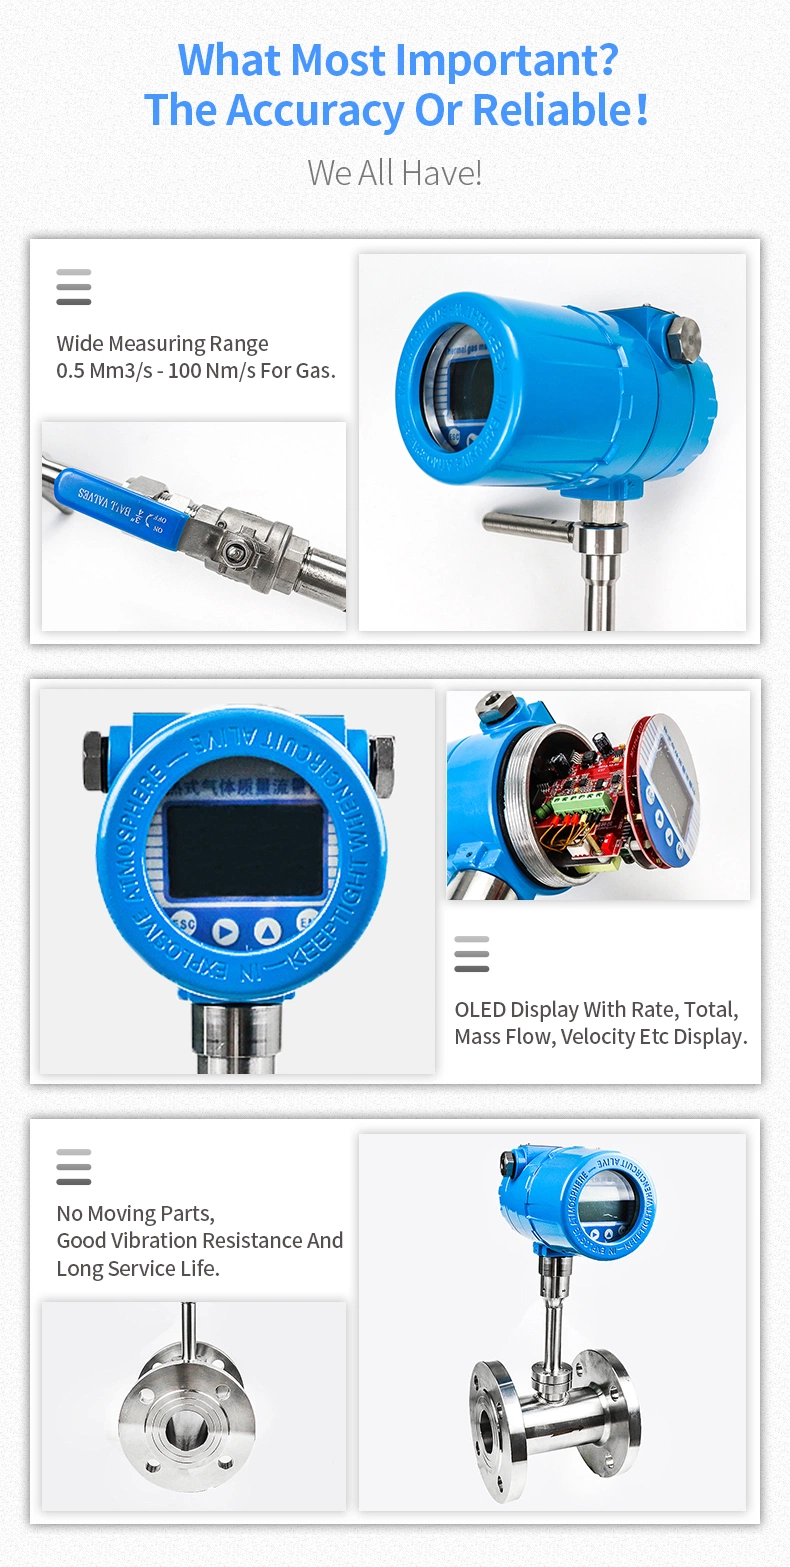 Gas Flow Totalizer DN150 Thermal Gas Mass Flow Meter for Hydrogen Gas